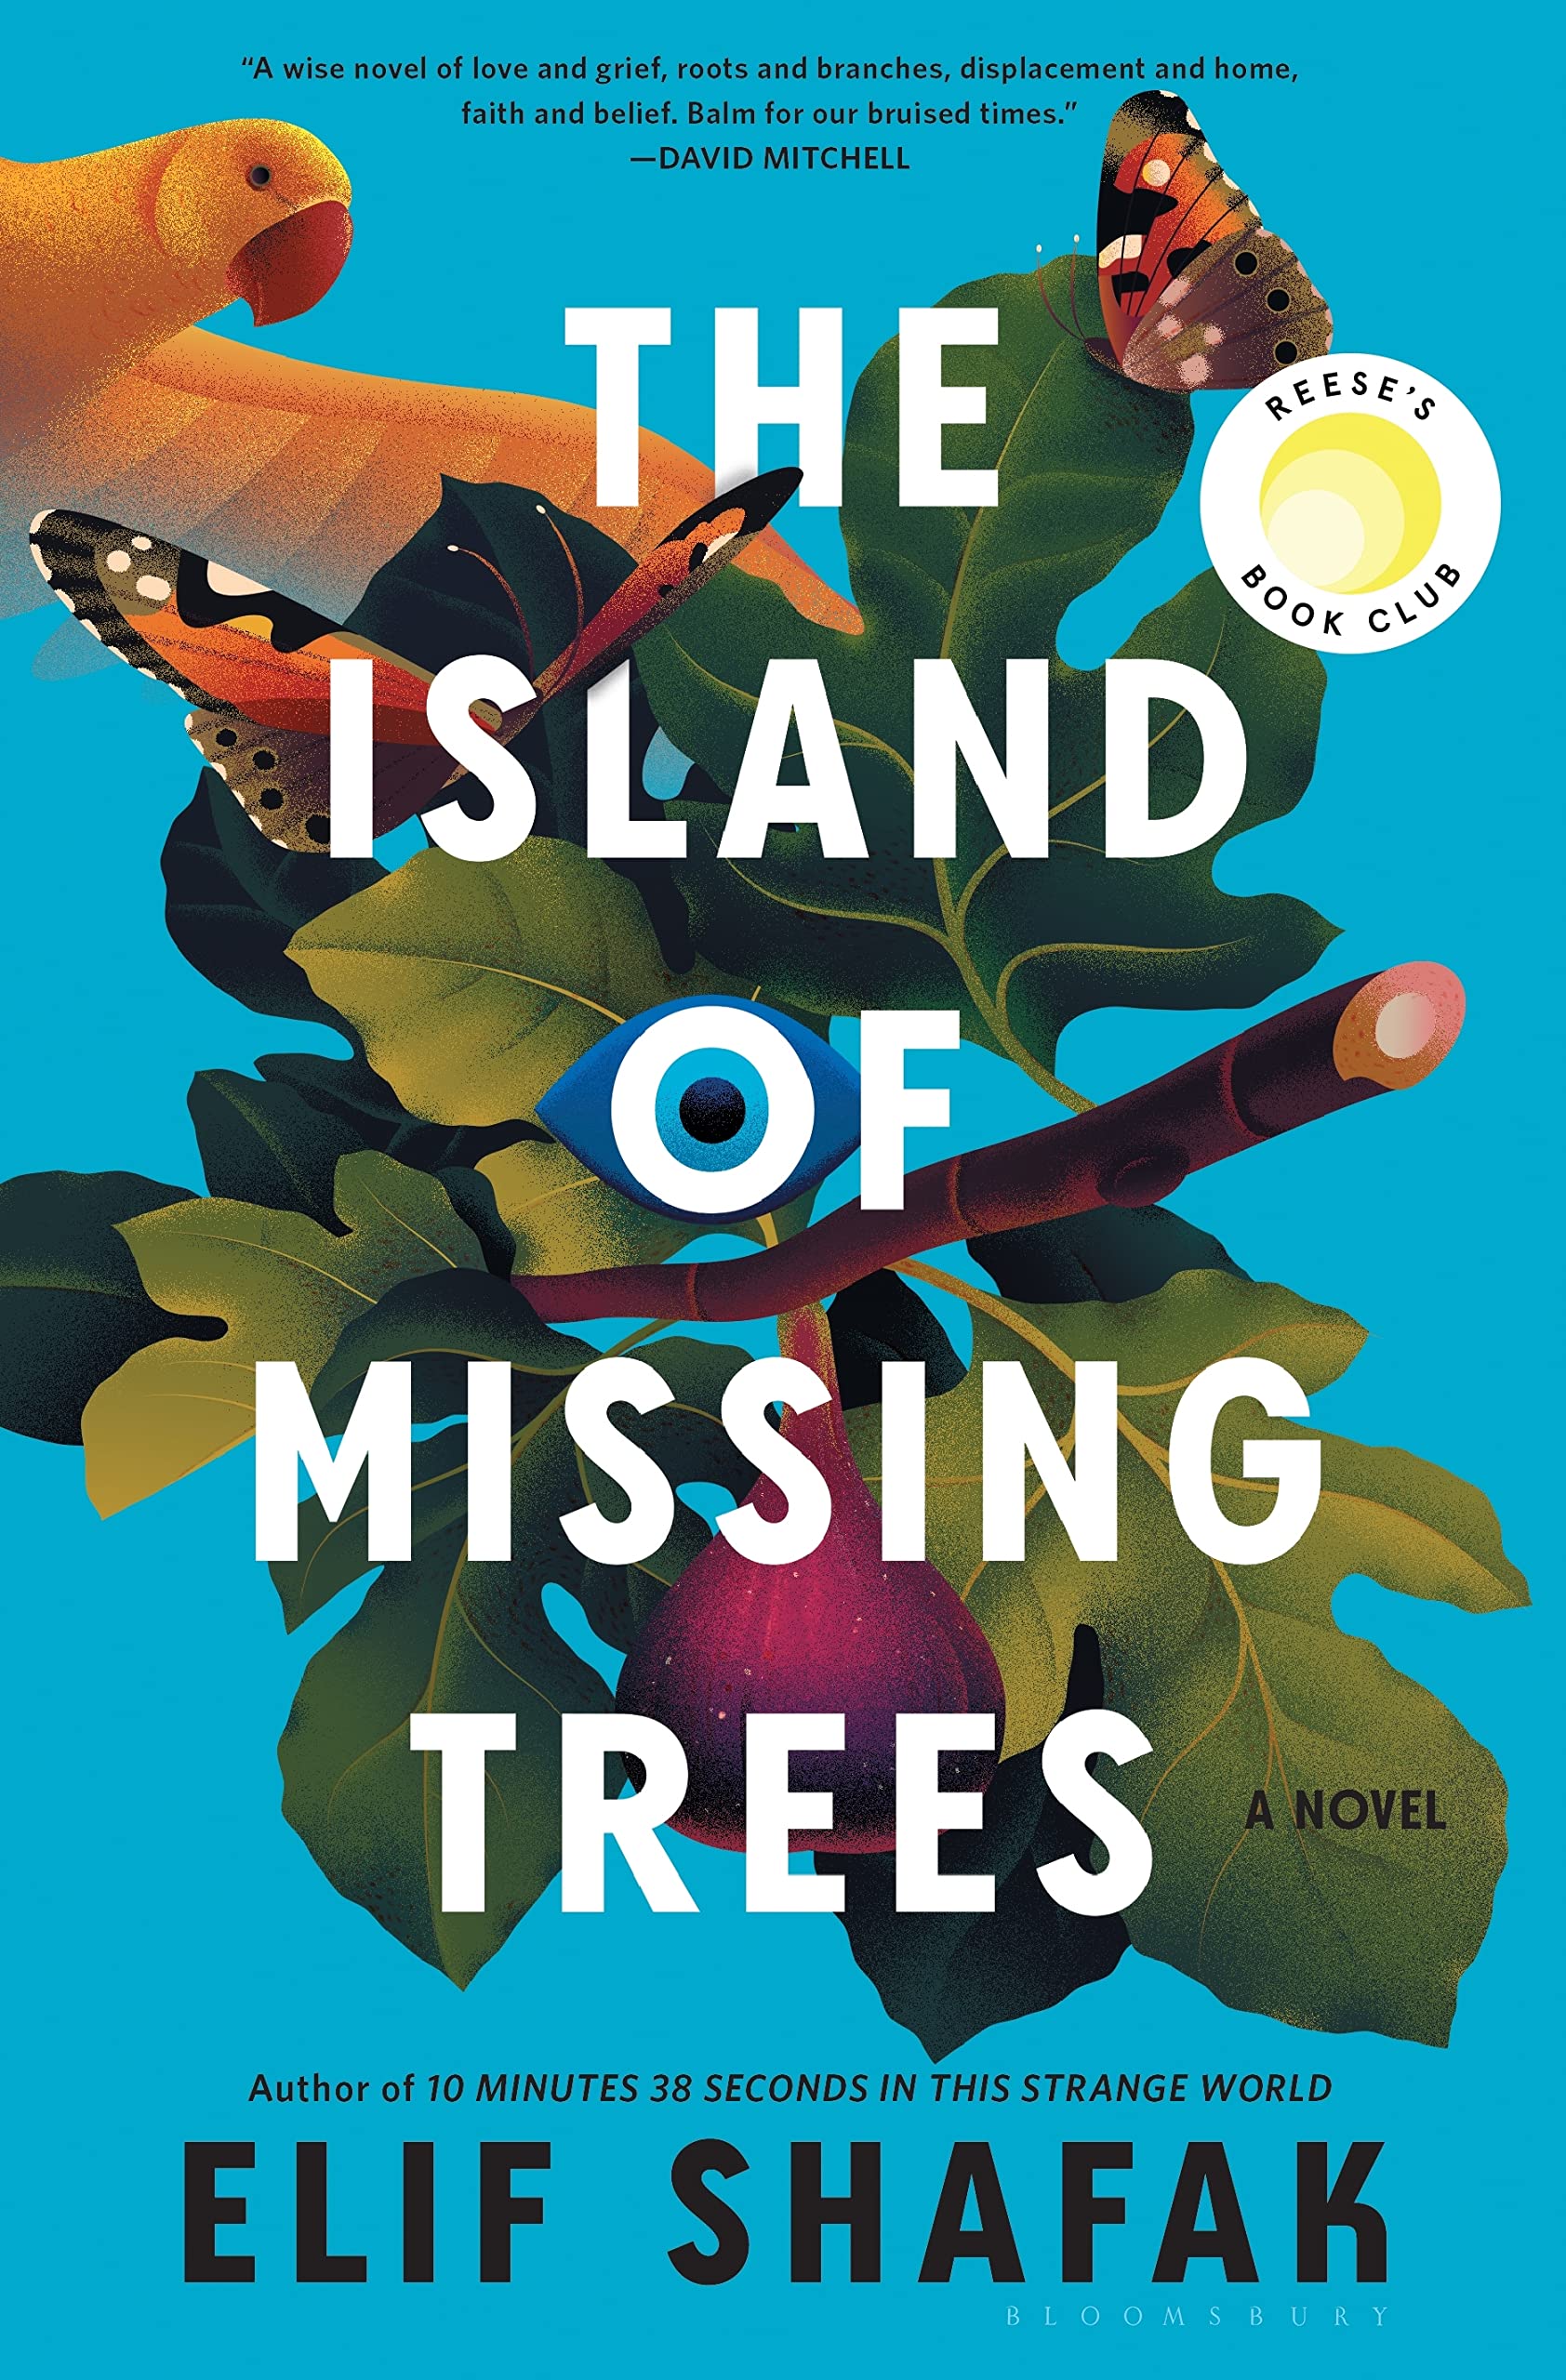 Image for "The Island of Missing Trees"